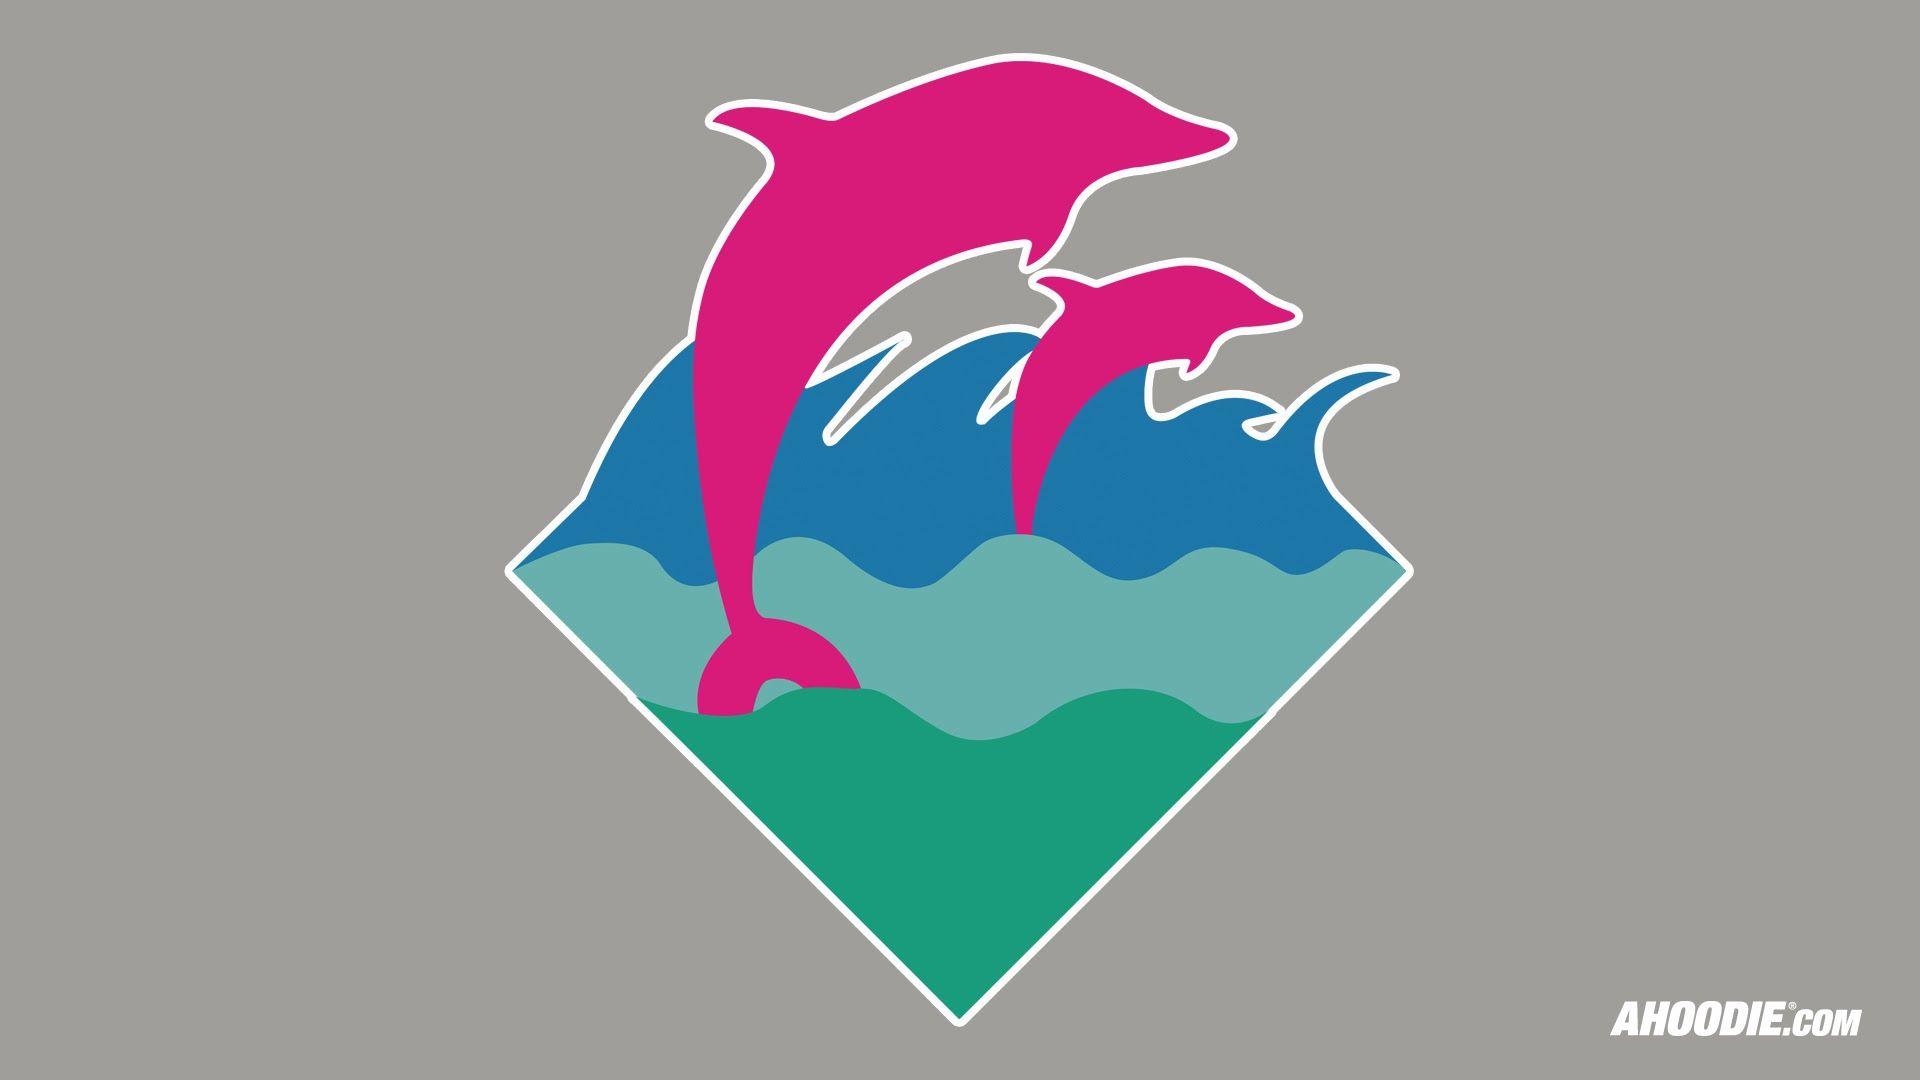 Pink Dolphin Ghost Logo - Pictures of Pink Dolphin Promo Logo - kidskunst.info